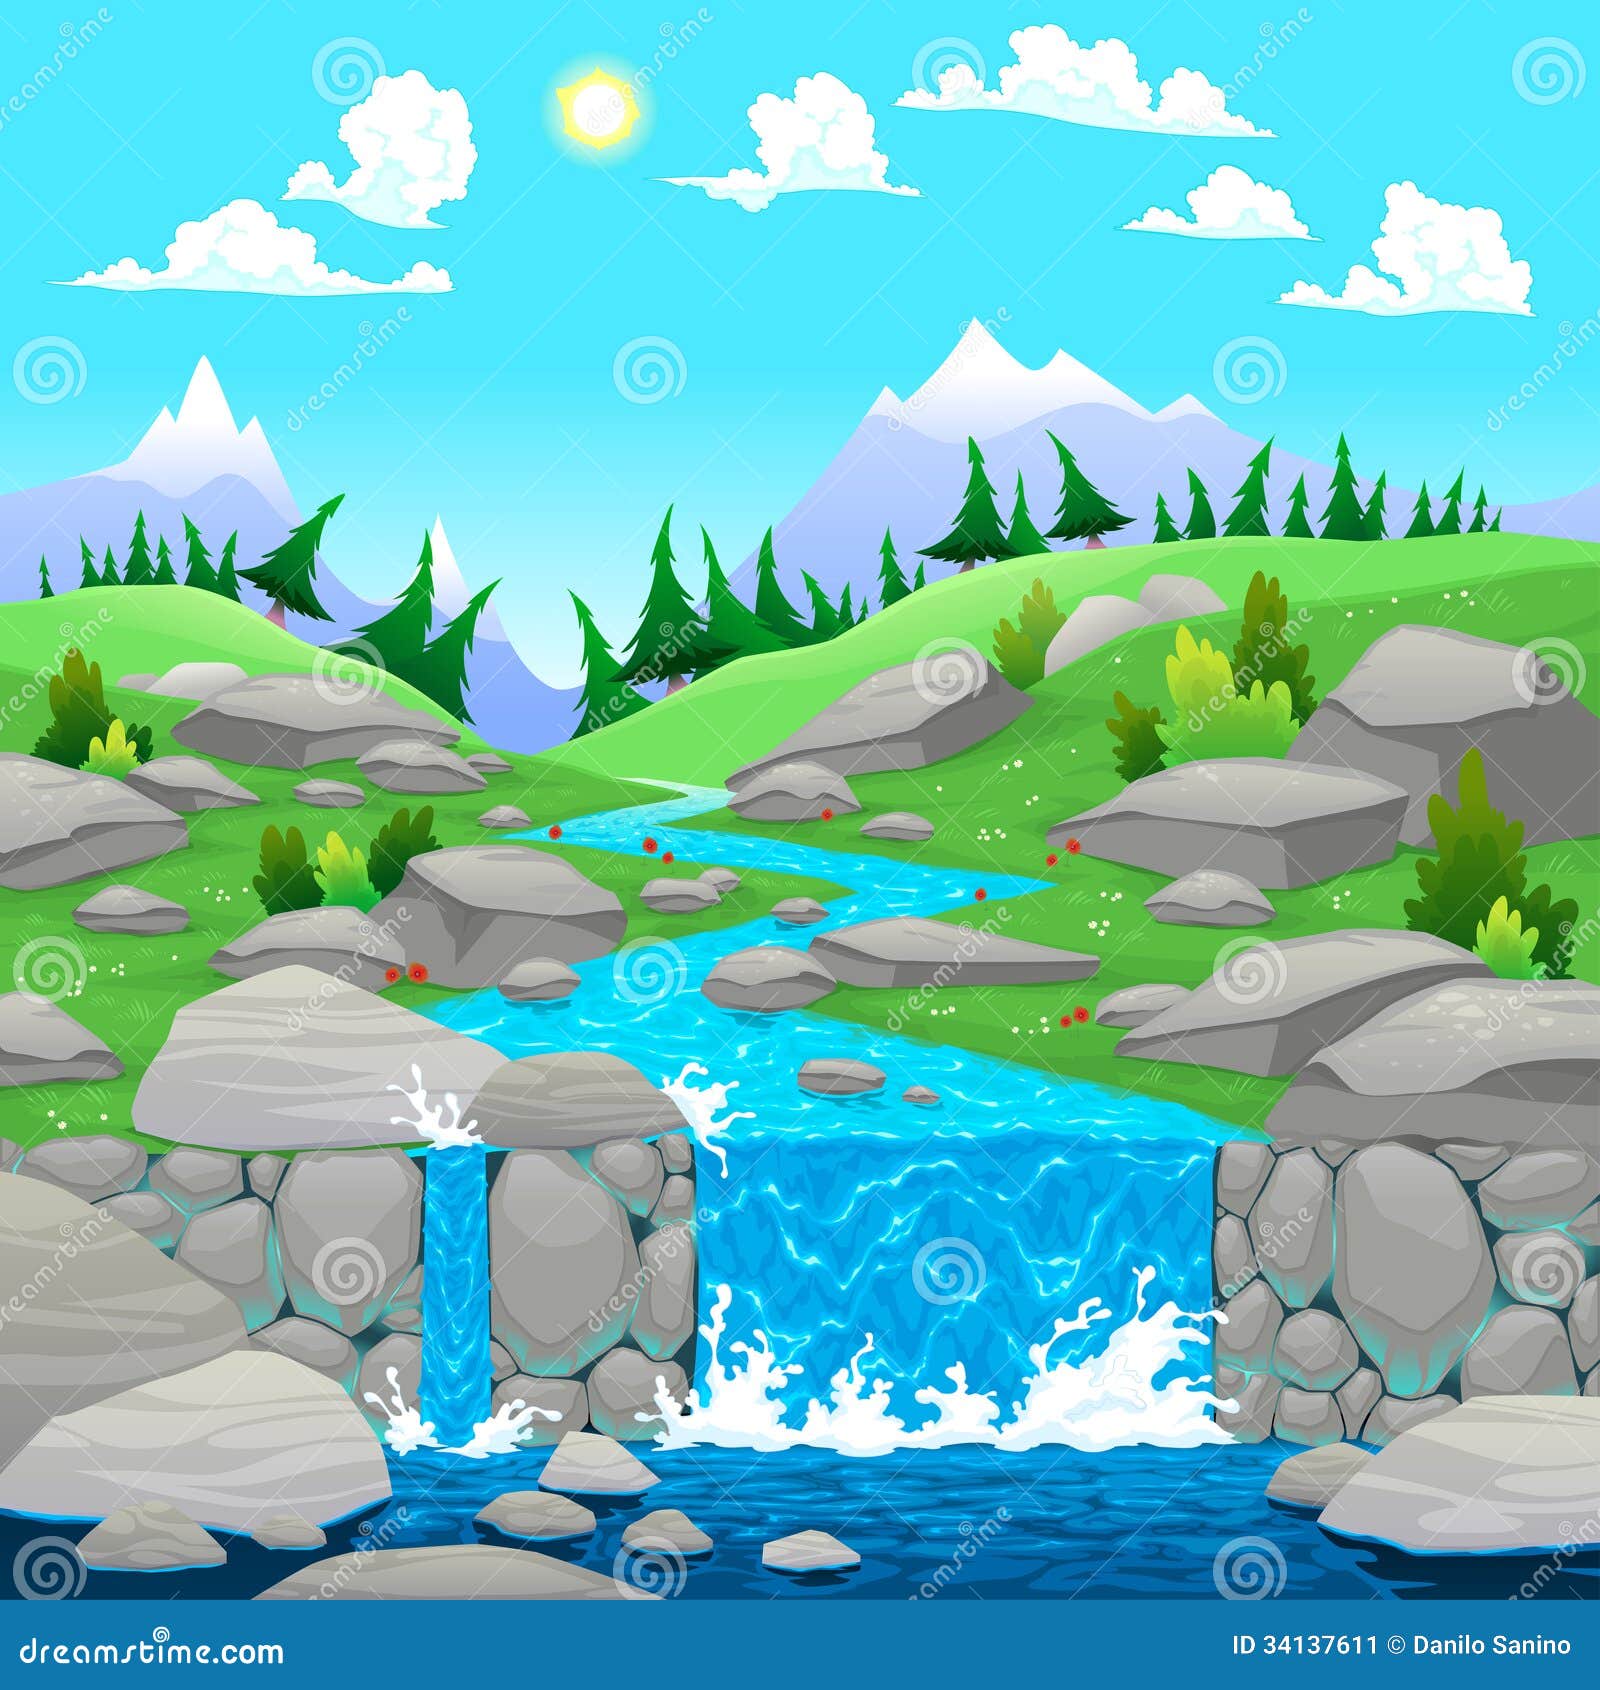 clipart rivers streams - photo #44